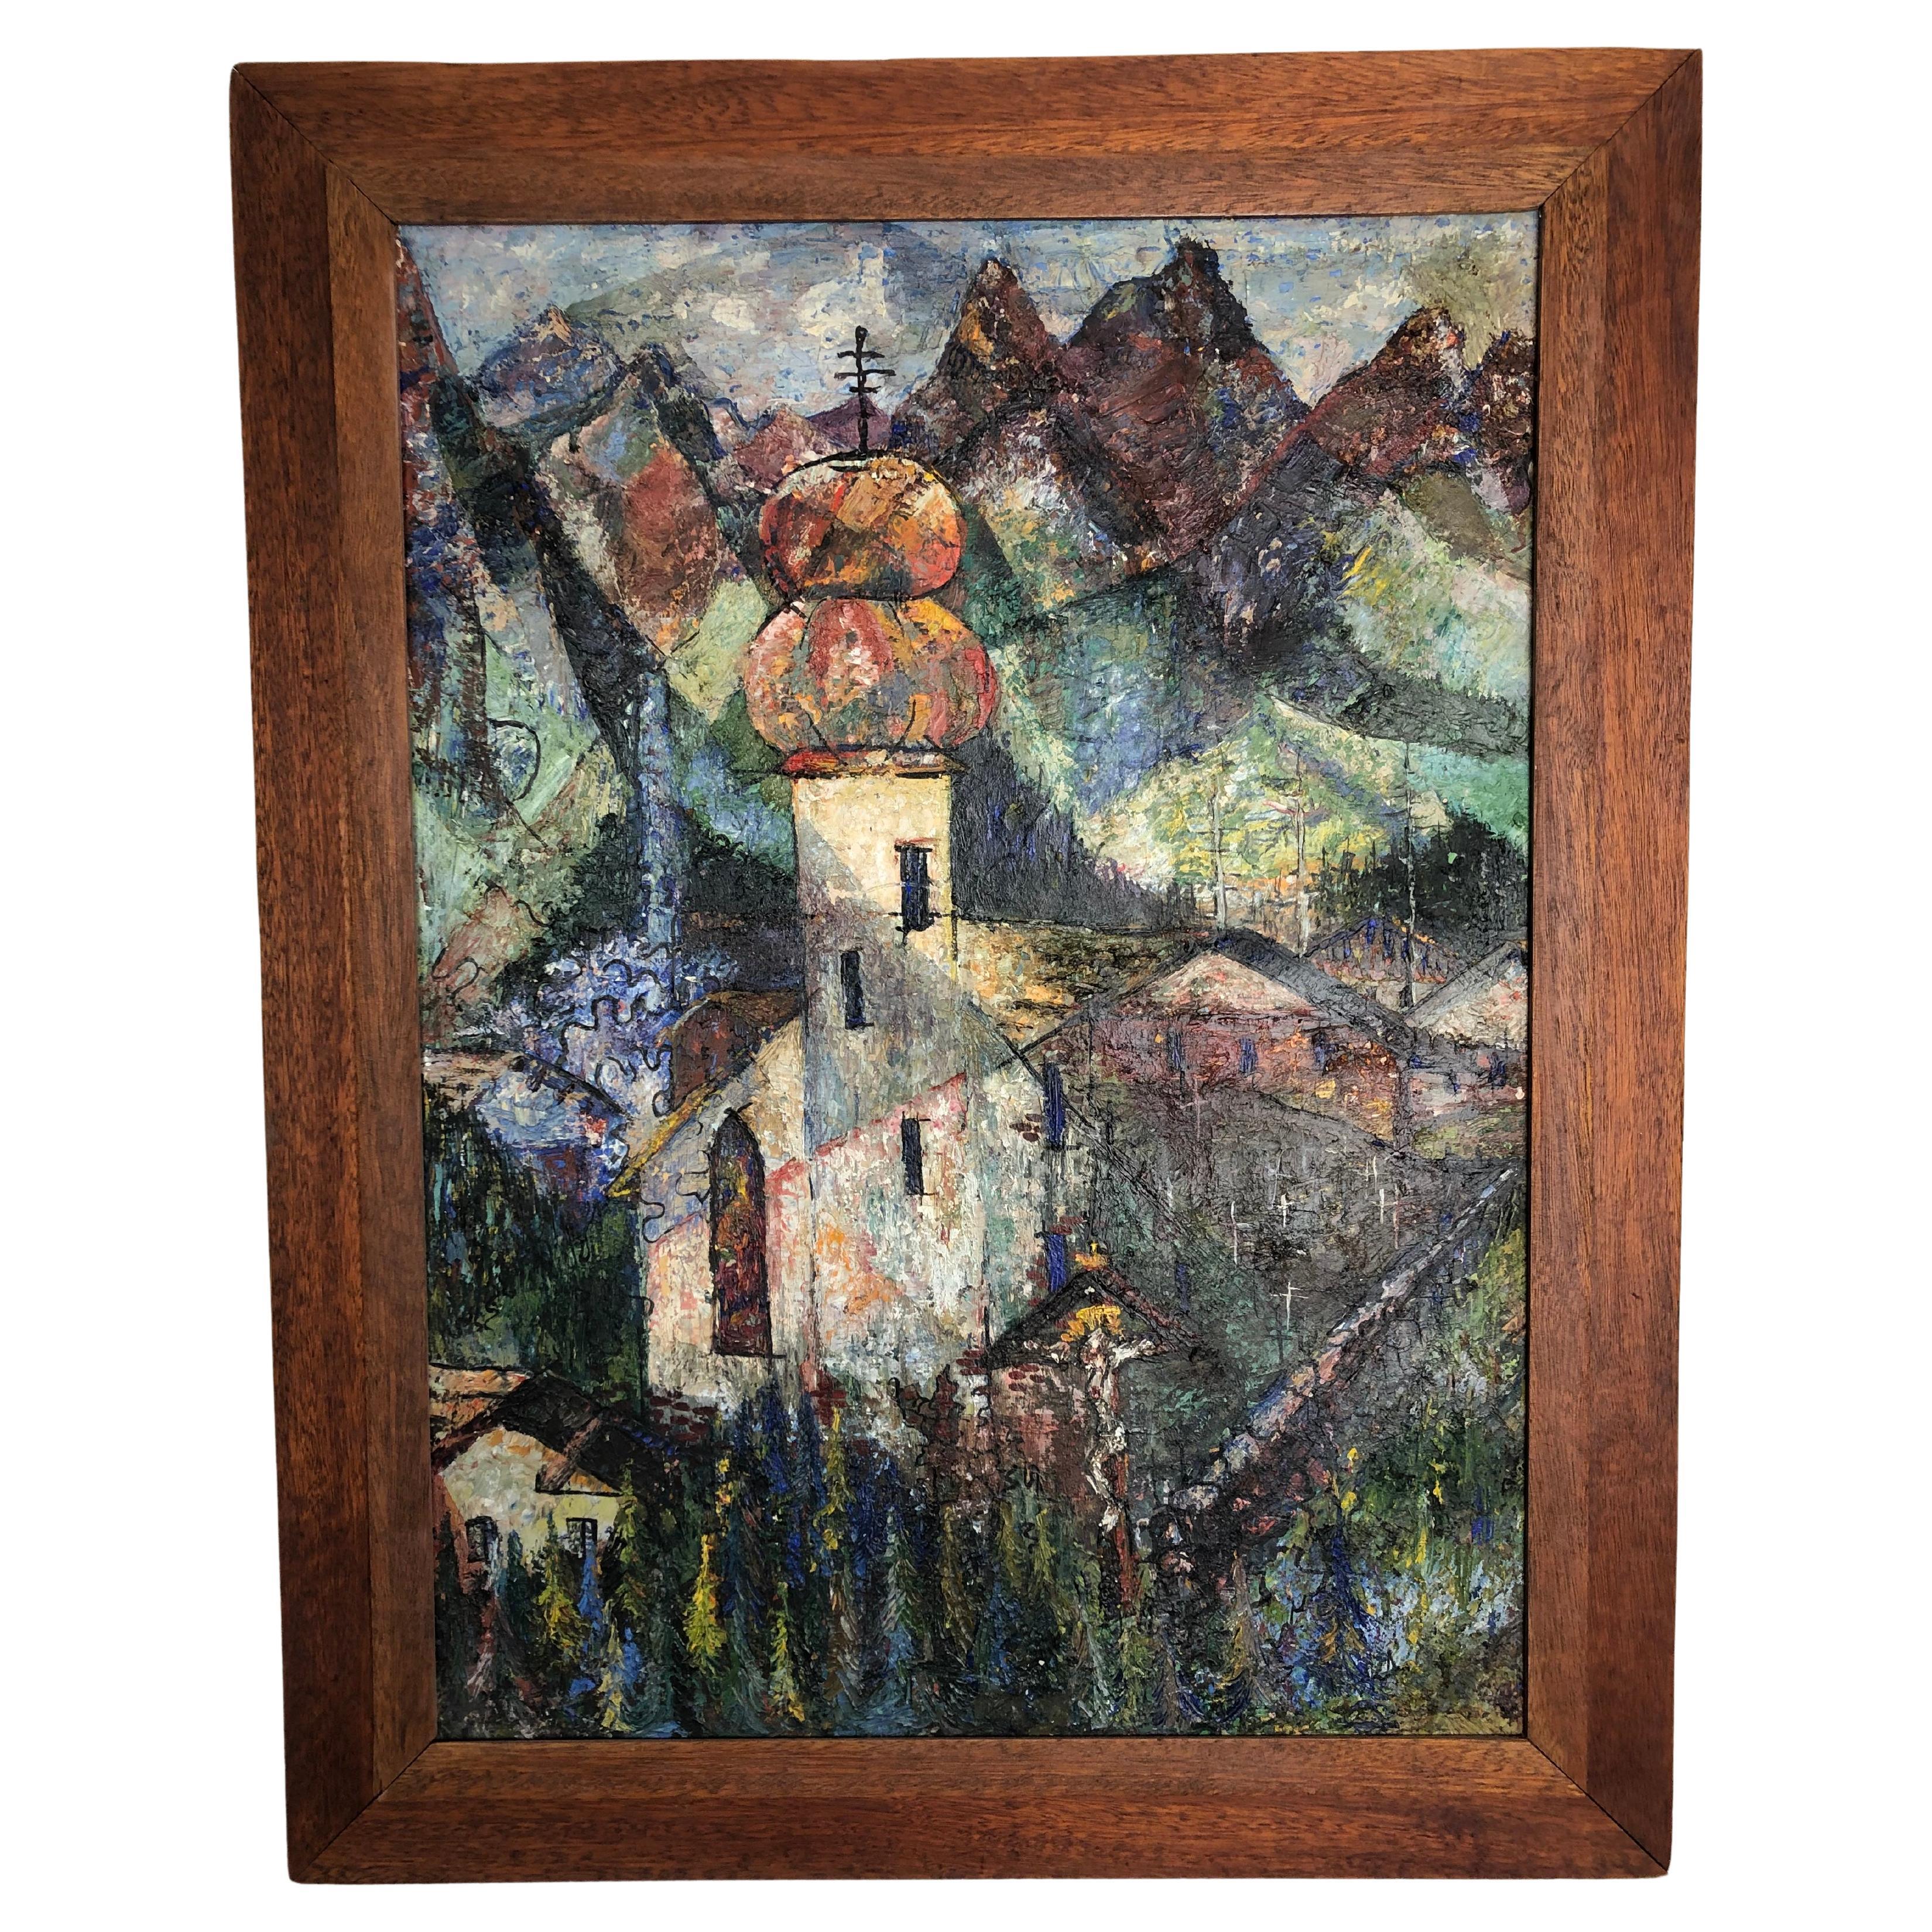 1952 Cubist, Oil on Board Painting, by Edward M. Brownlee Titled "Auf Tirol"